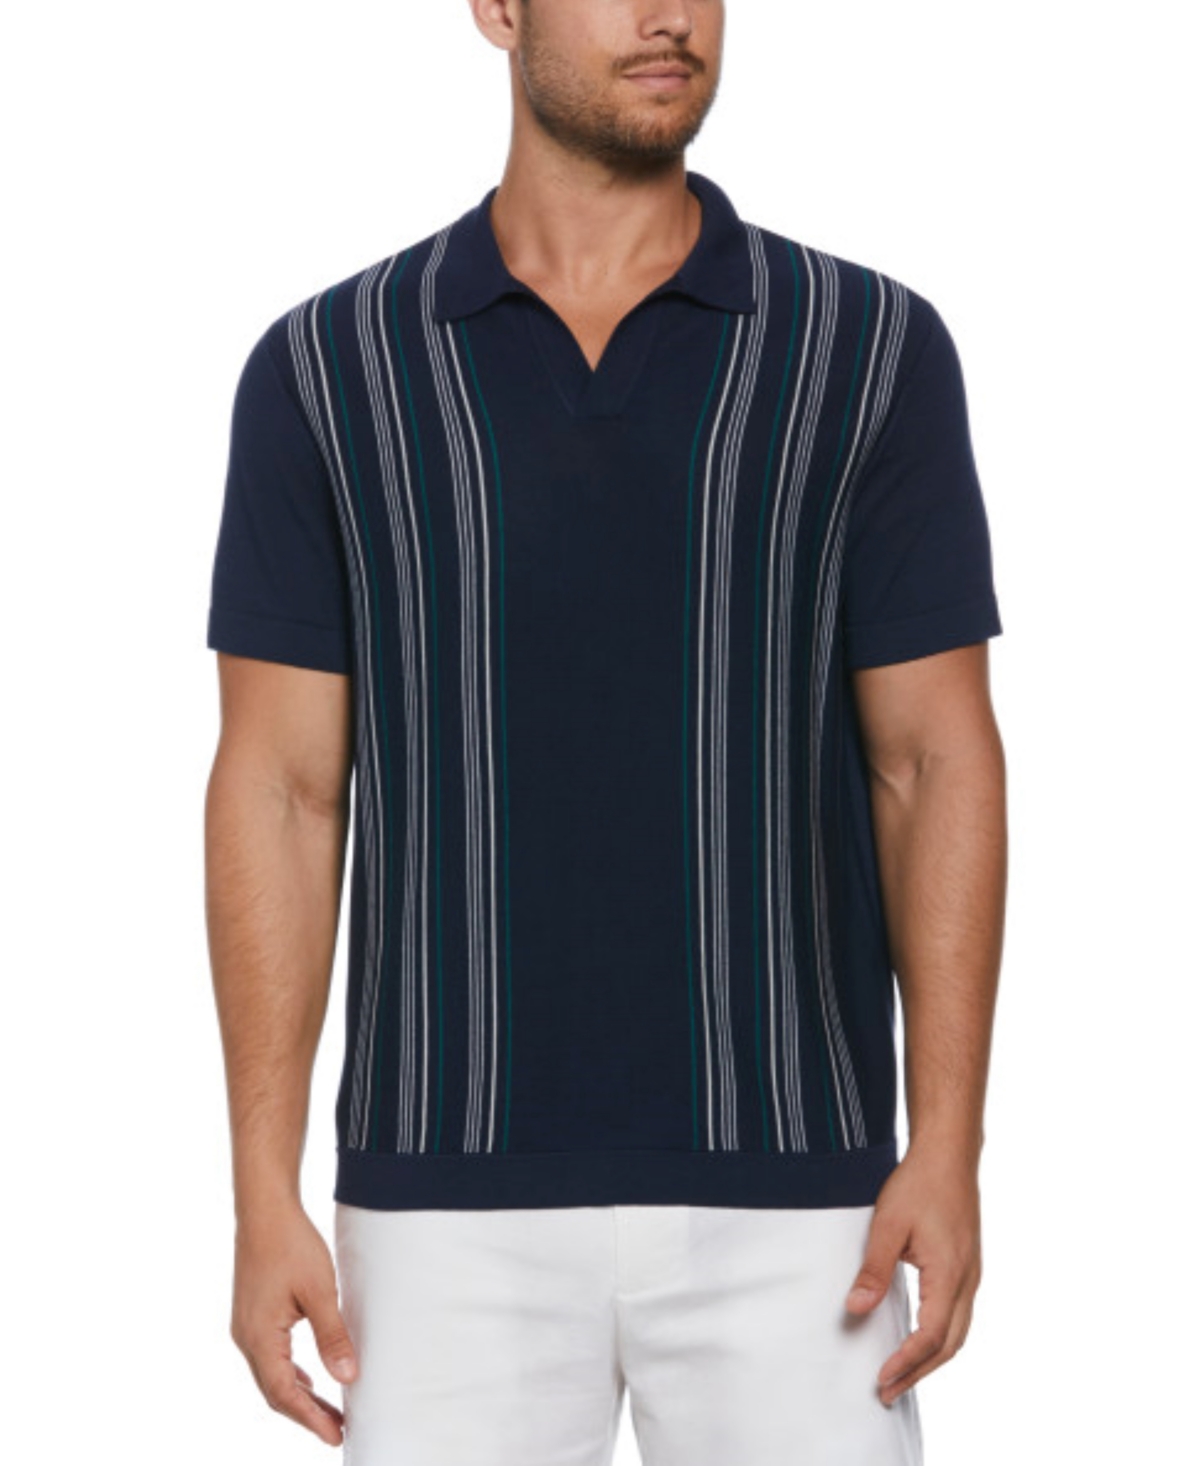 Men's Short Sleeve Striped-Panel Johnny Collar Sweater Polo - Naval Academy